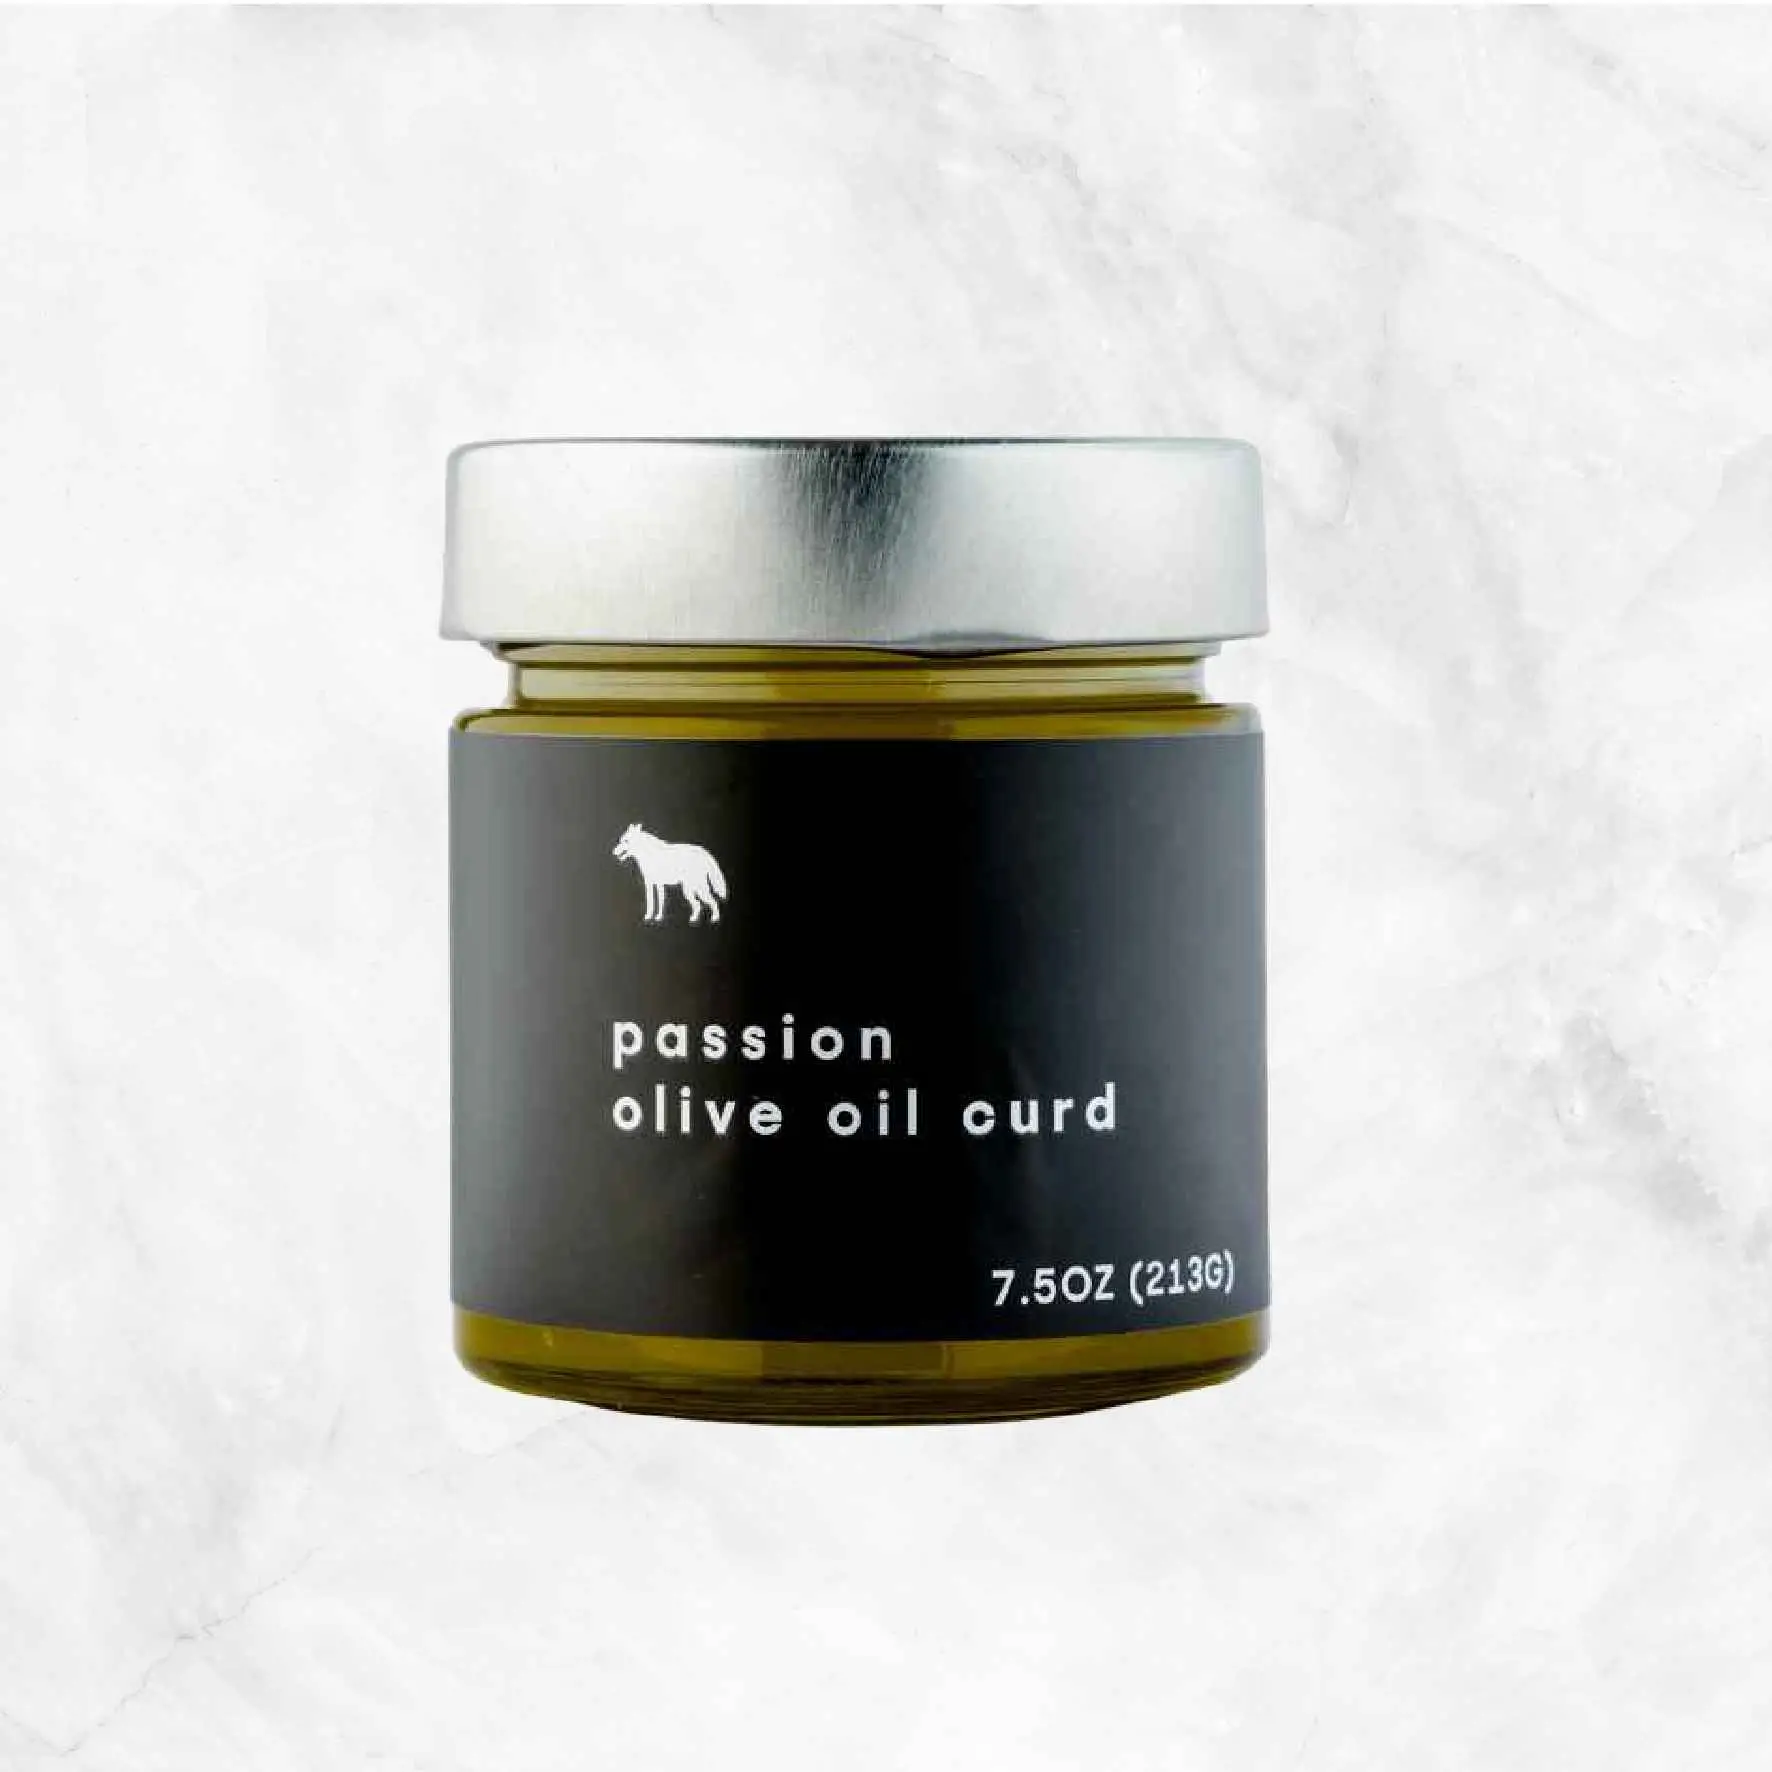 Passion Olive Oil Curd Delivery